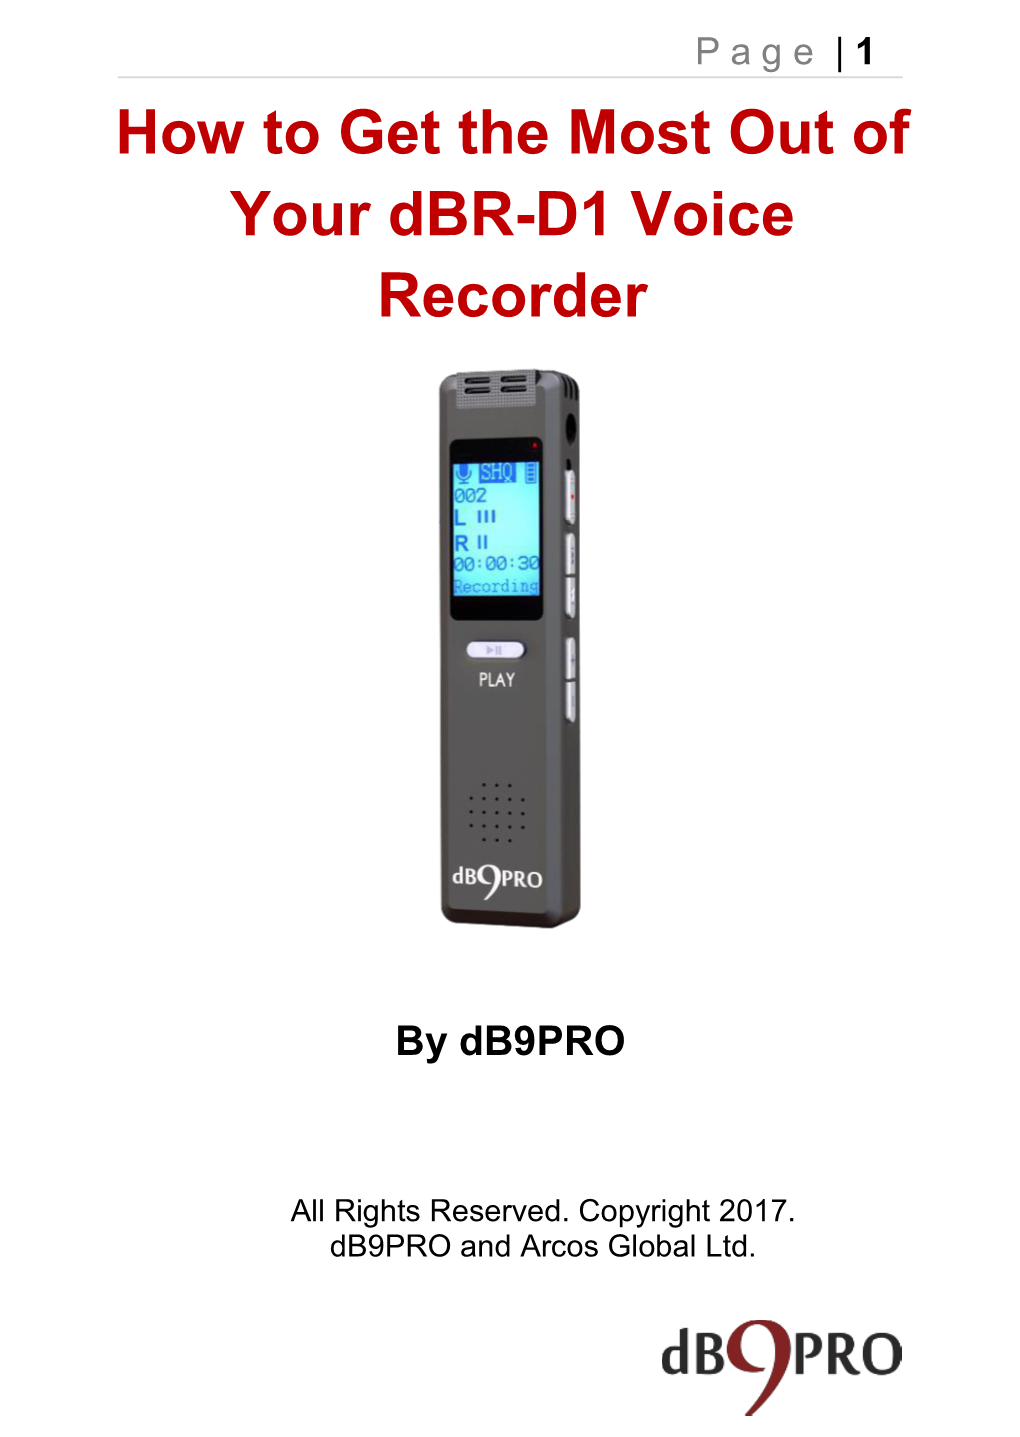 How to Get the Most out of Your USB Voice Recorder